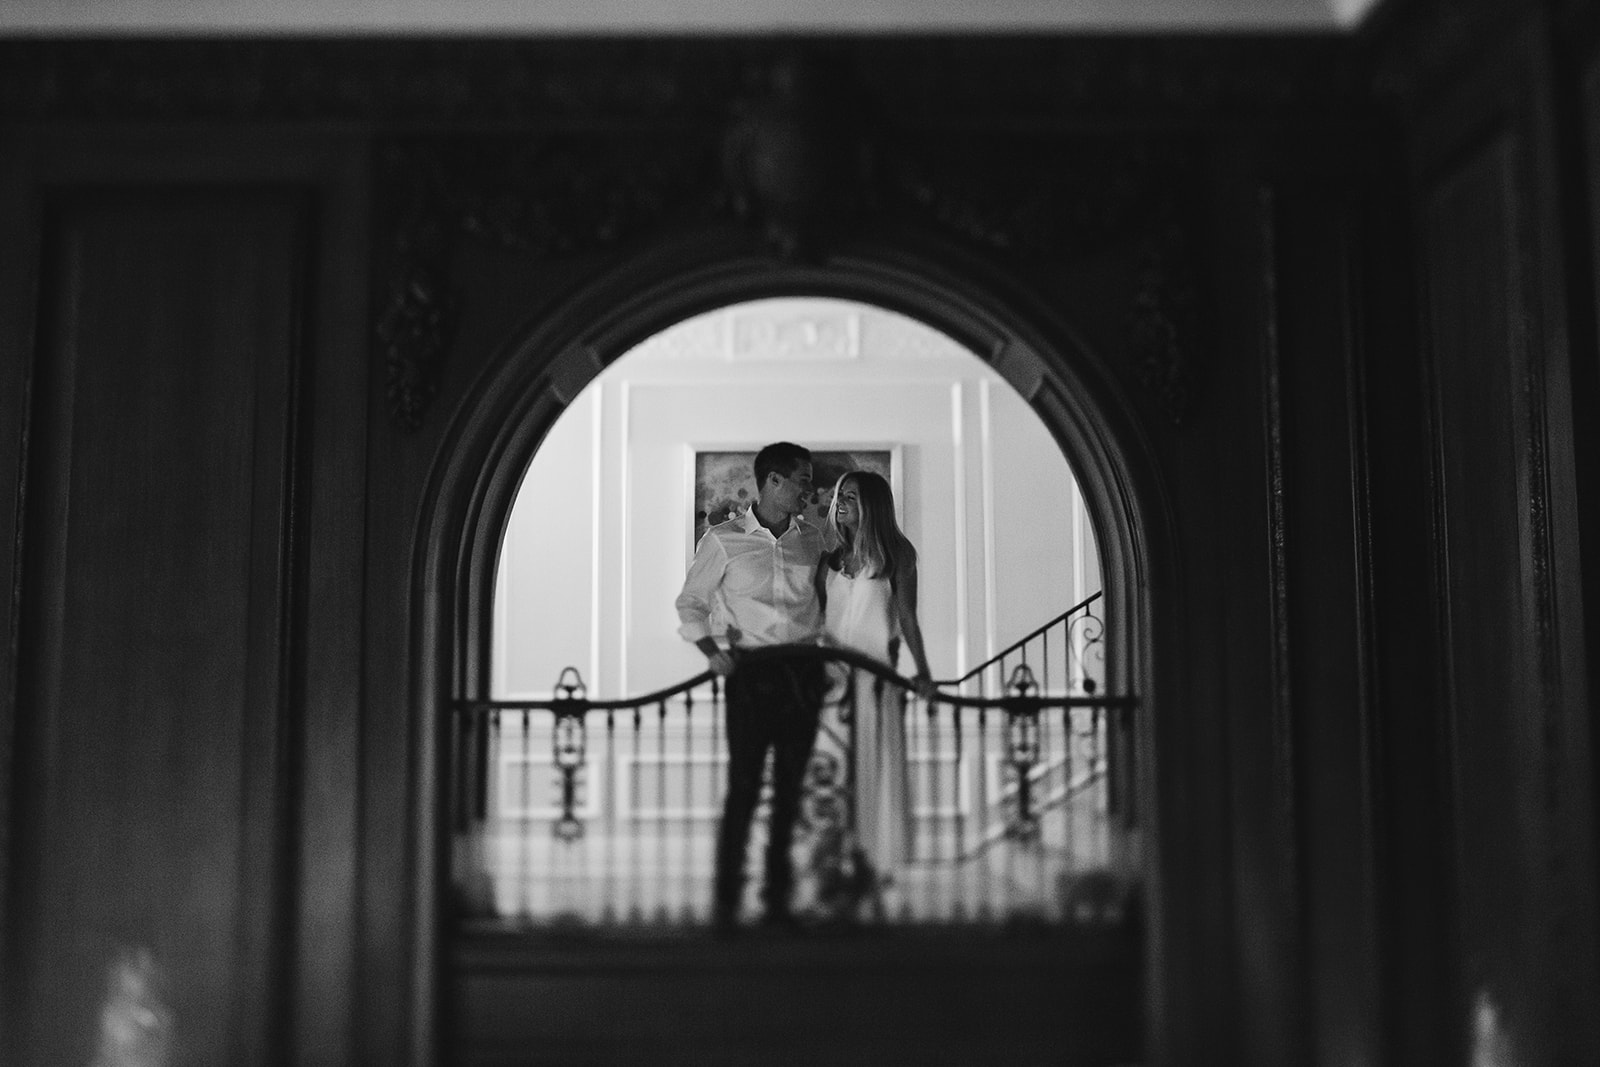 A bride and groom pose together in an archway on the landing of an old staircase.